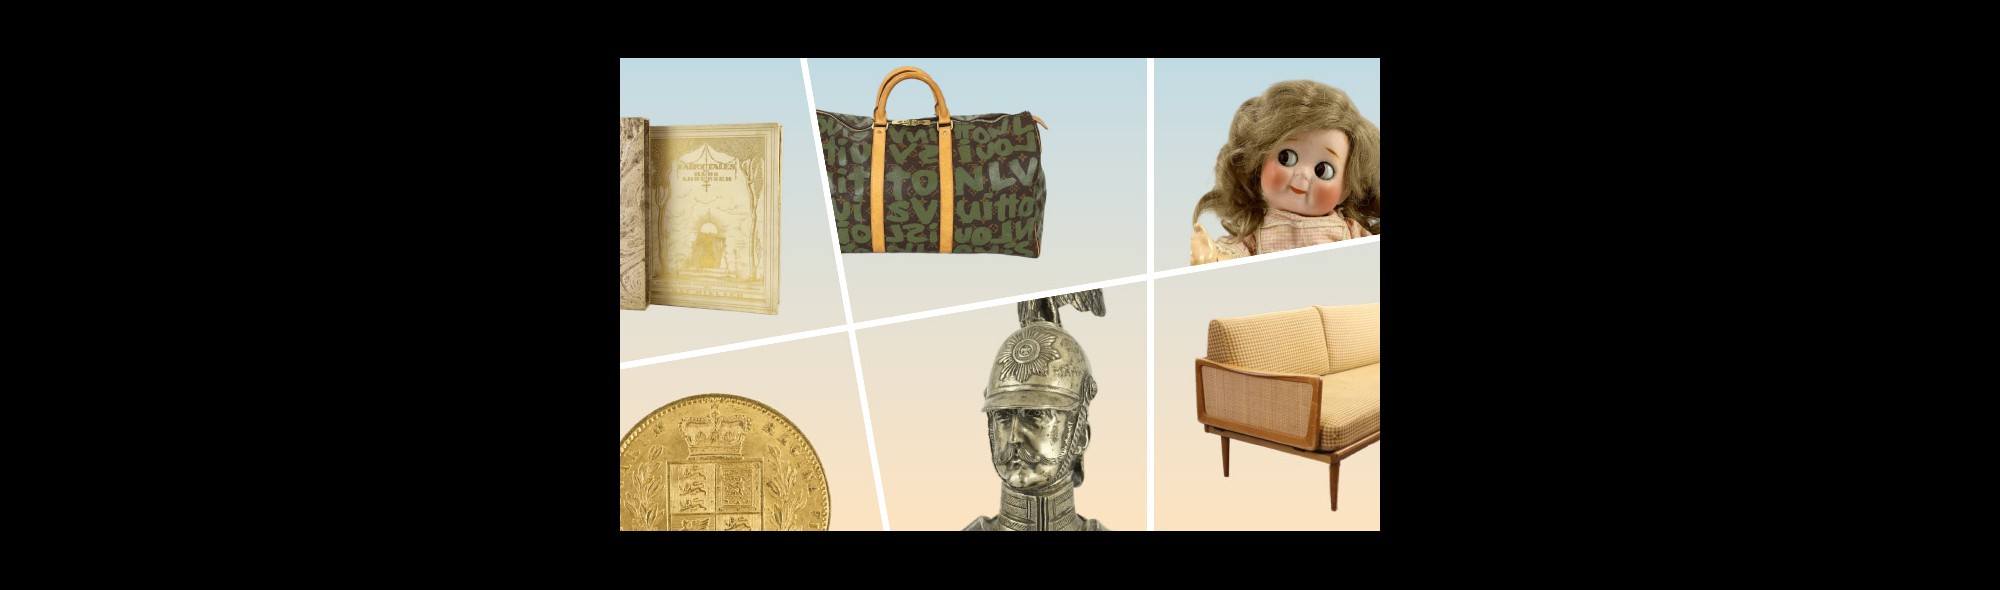 Specialist Auctions — Books, Designer, Dolls, Coins and Antiques